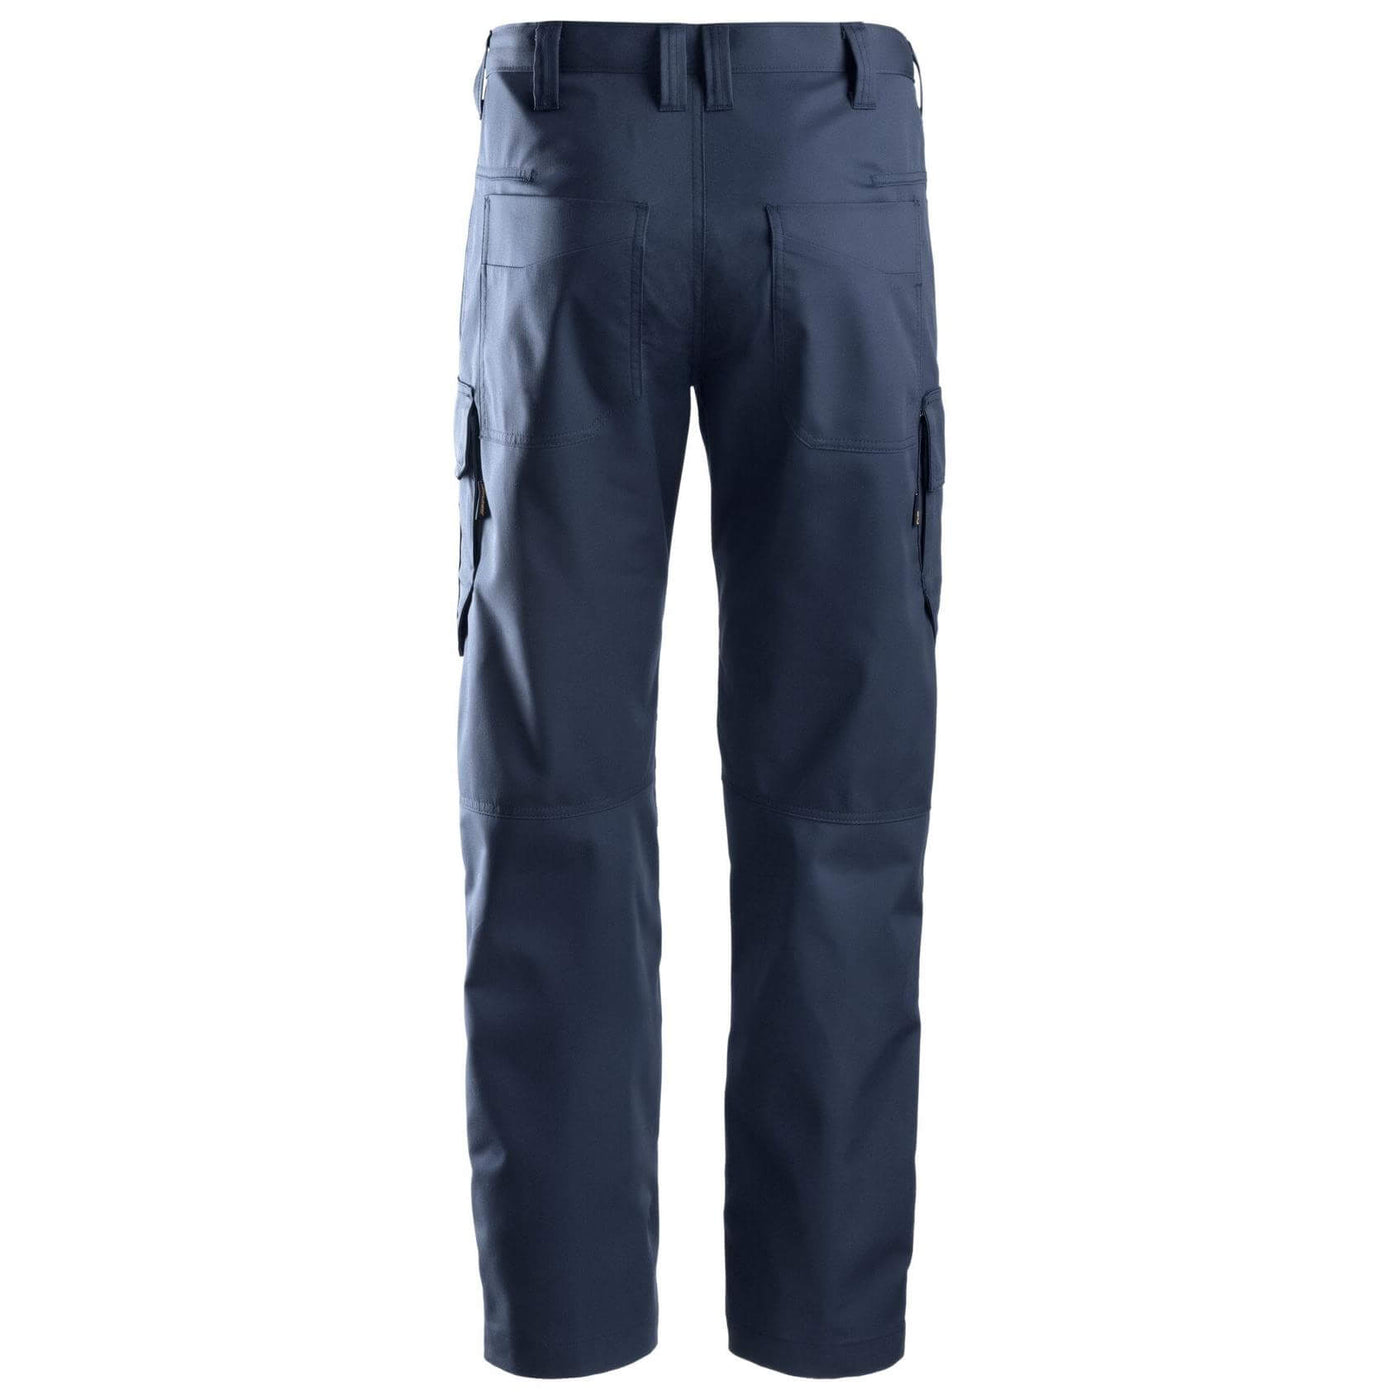 Snickers 6801 Service Trousers with Knee Pad Pockets Navy Navy back #colour_navy-navy